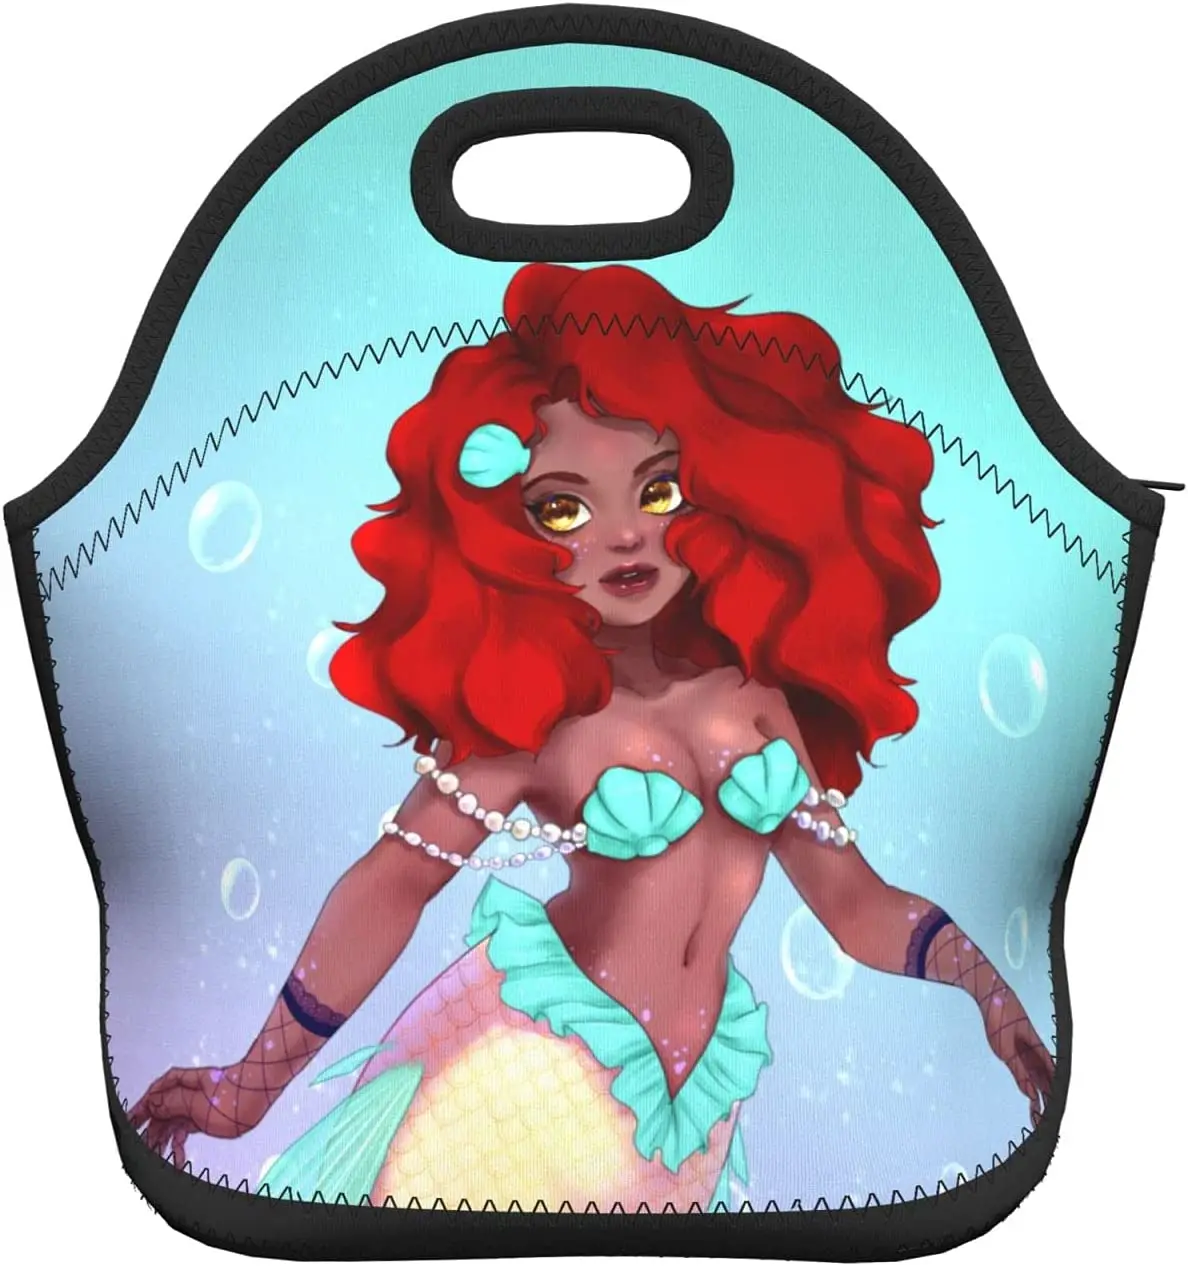 

Neoprene Lunch Bags Insulated Mermaid Woman Lunch Bag Black Girl Lunch Tote Bag with Containers Lunch Box for Women Girls